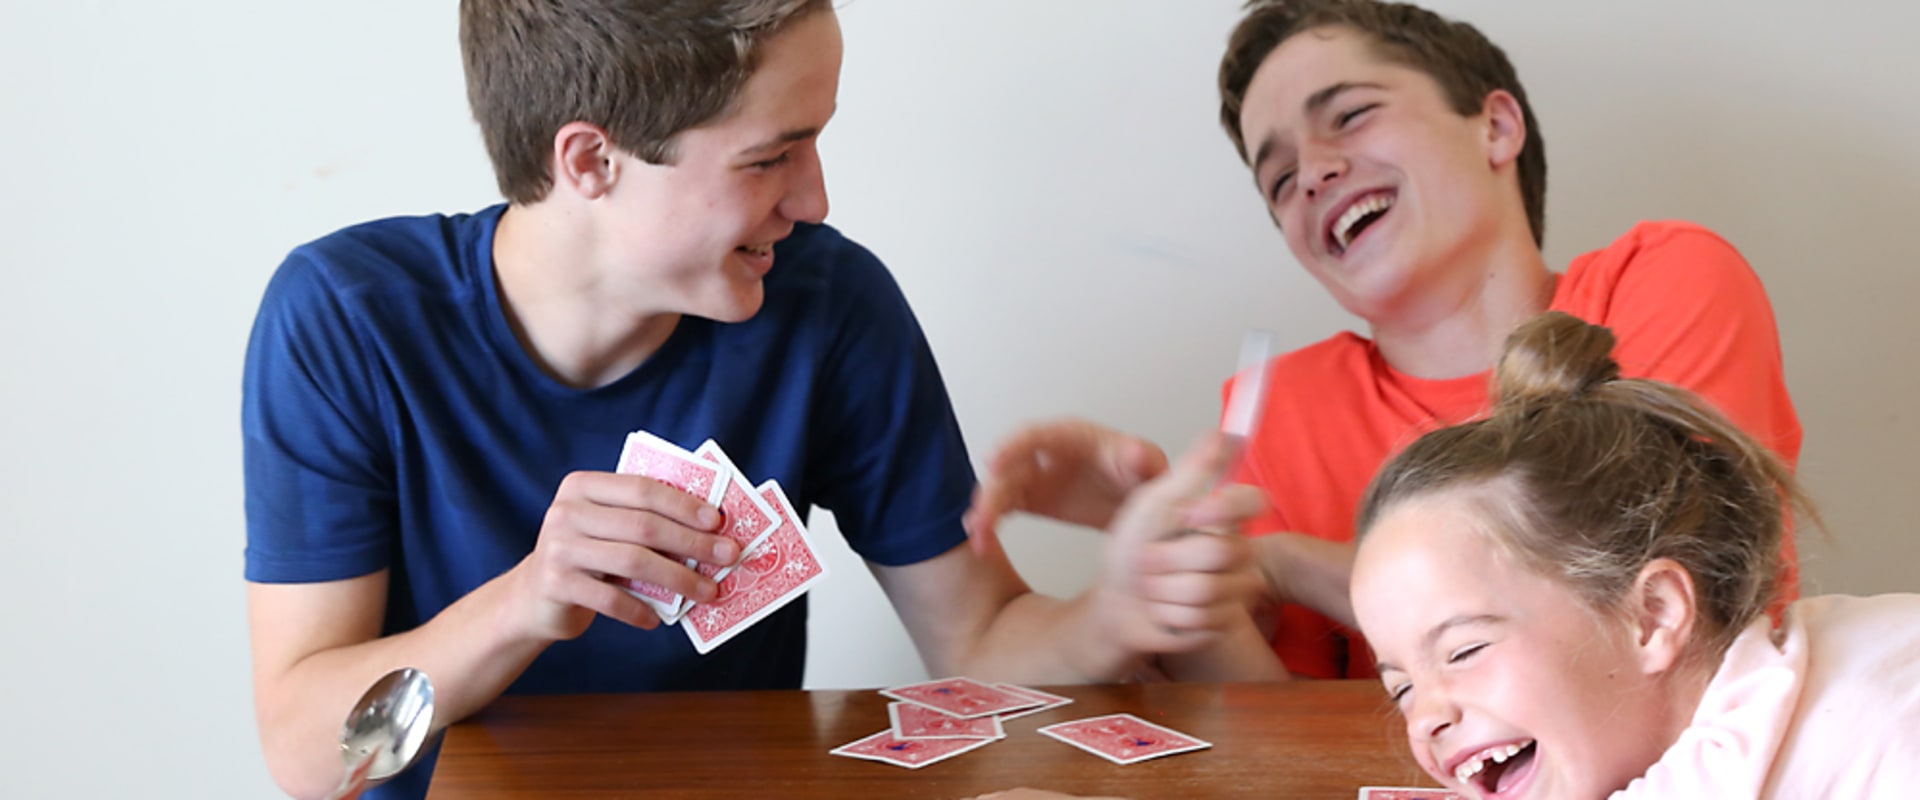 Spoons: A Look at the Popular Card Game